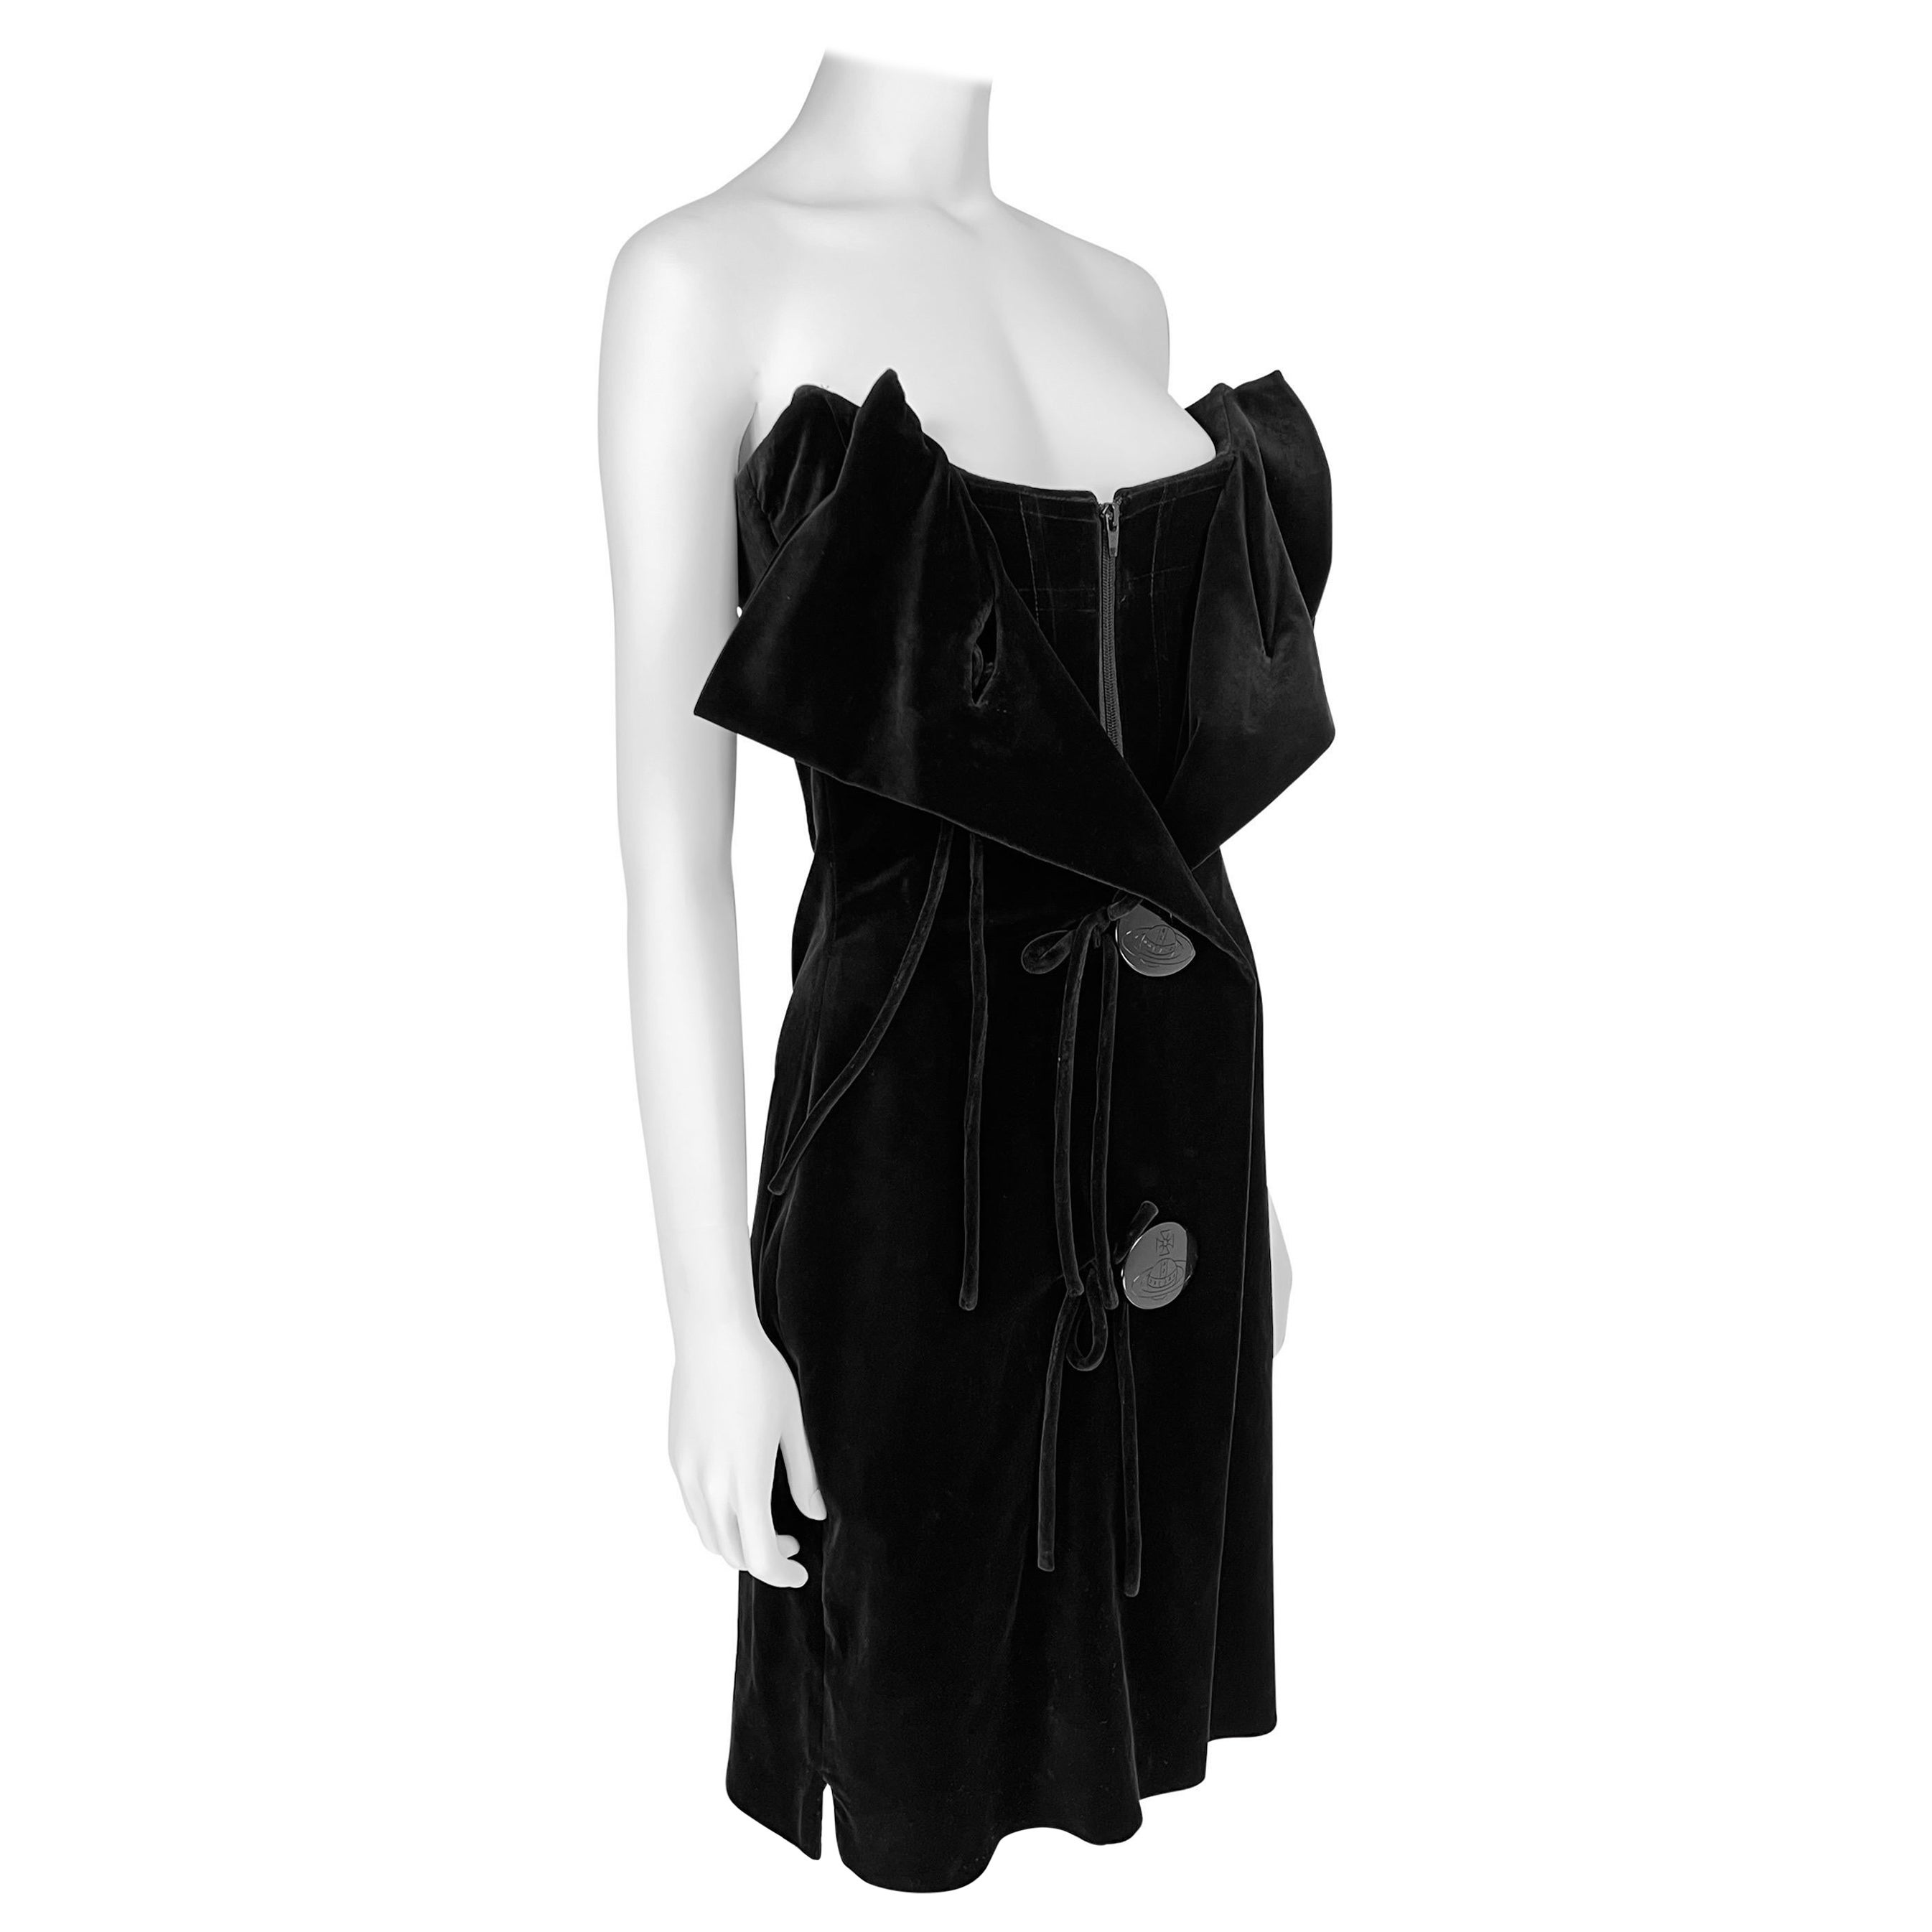 Fall 1998 Vivienne Westwood Corseted Velvet Dress For Sale